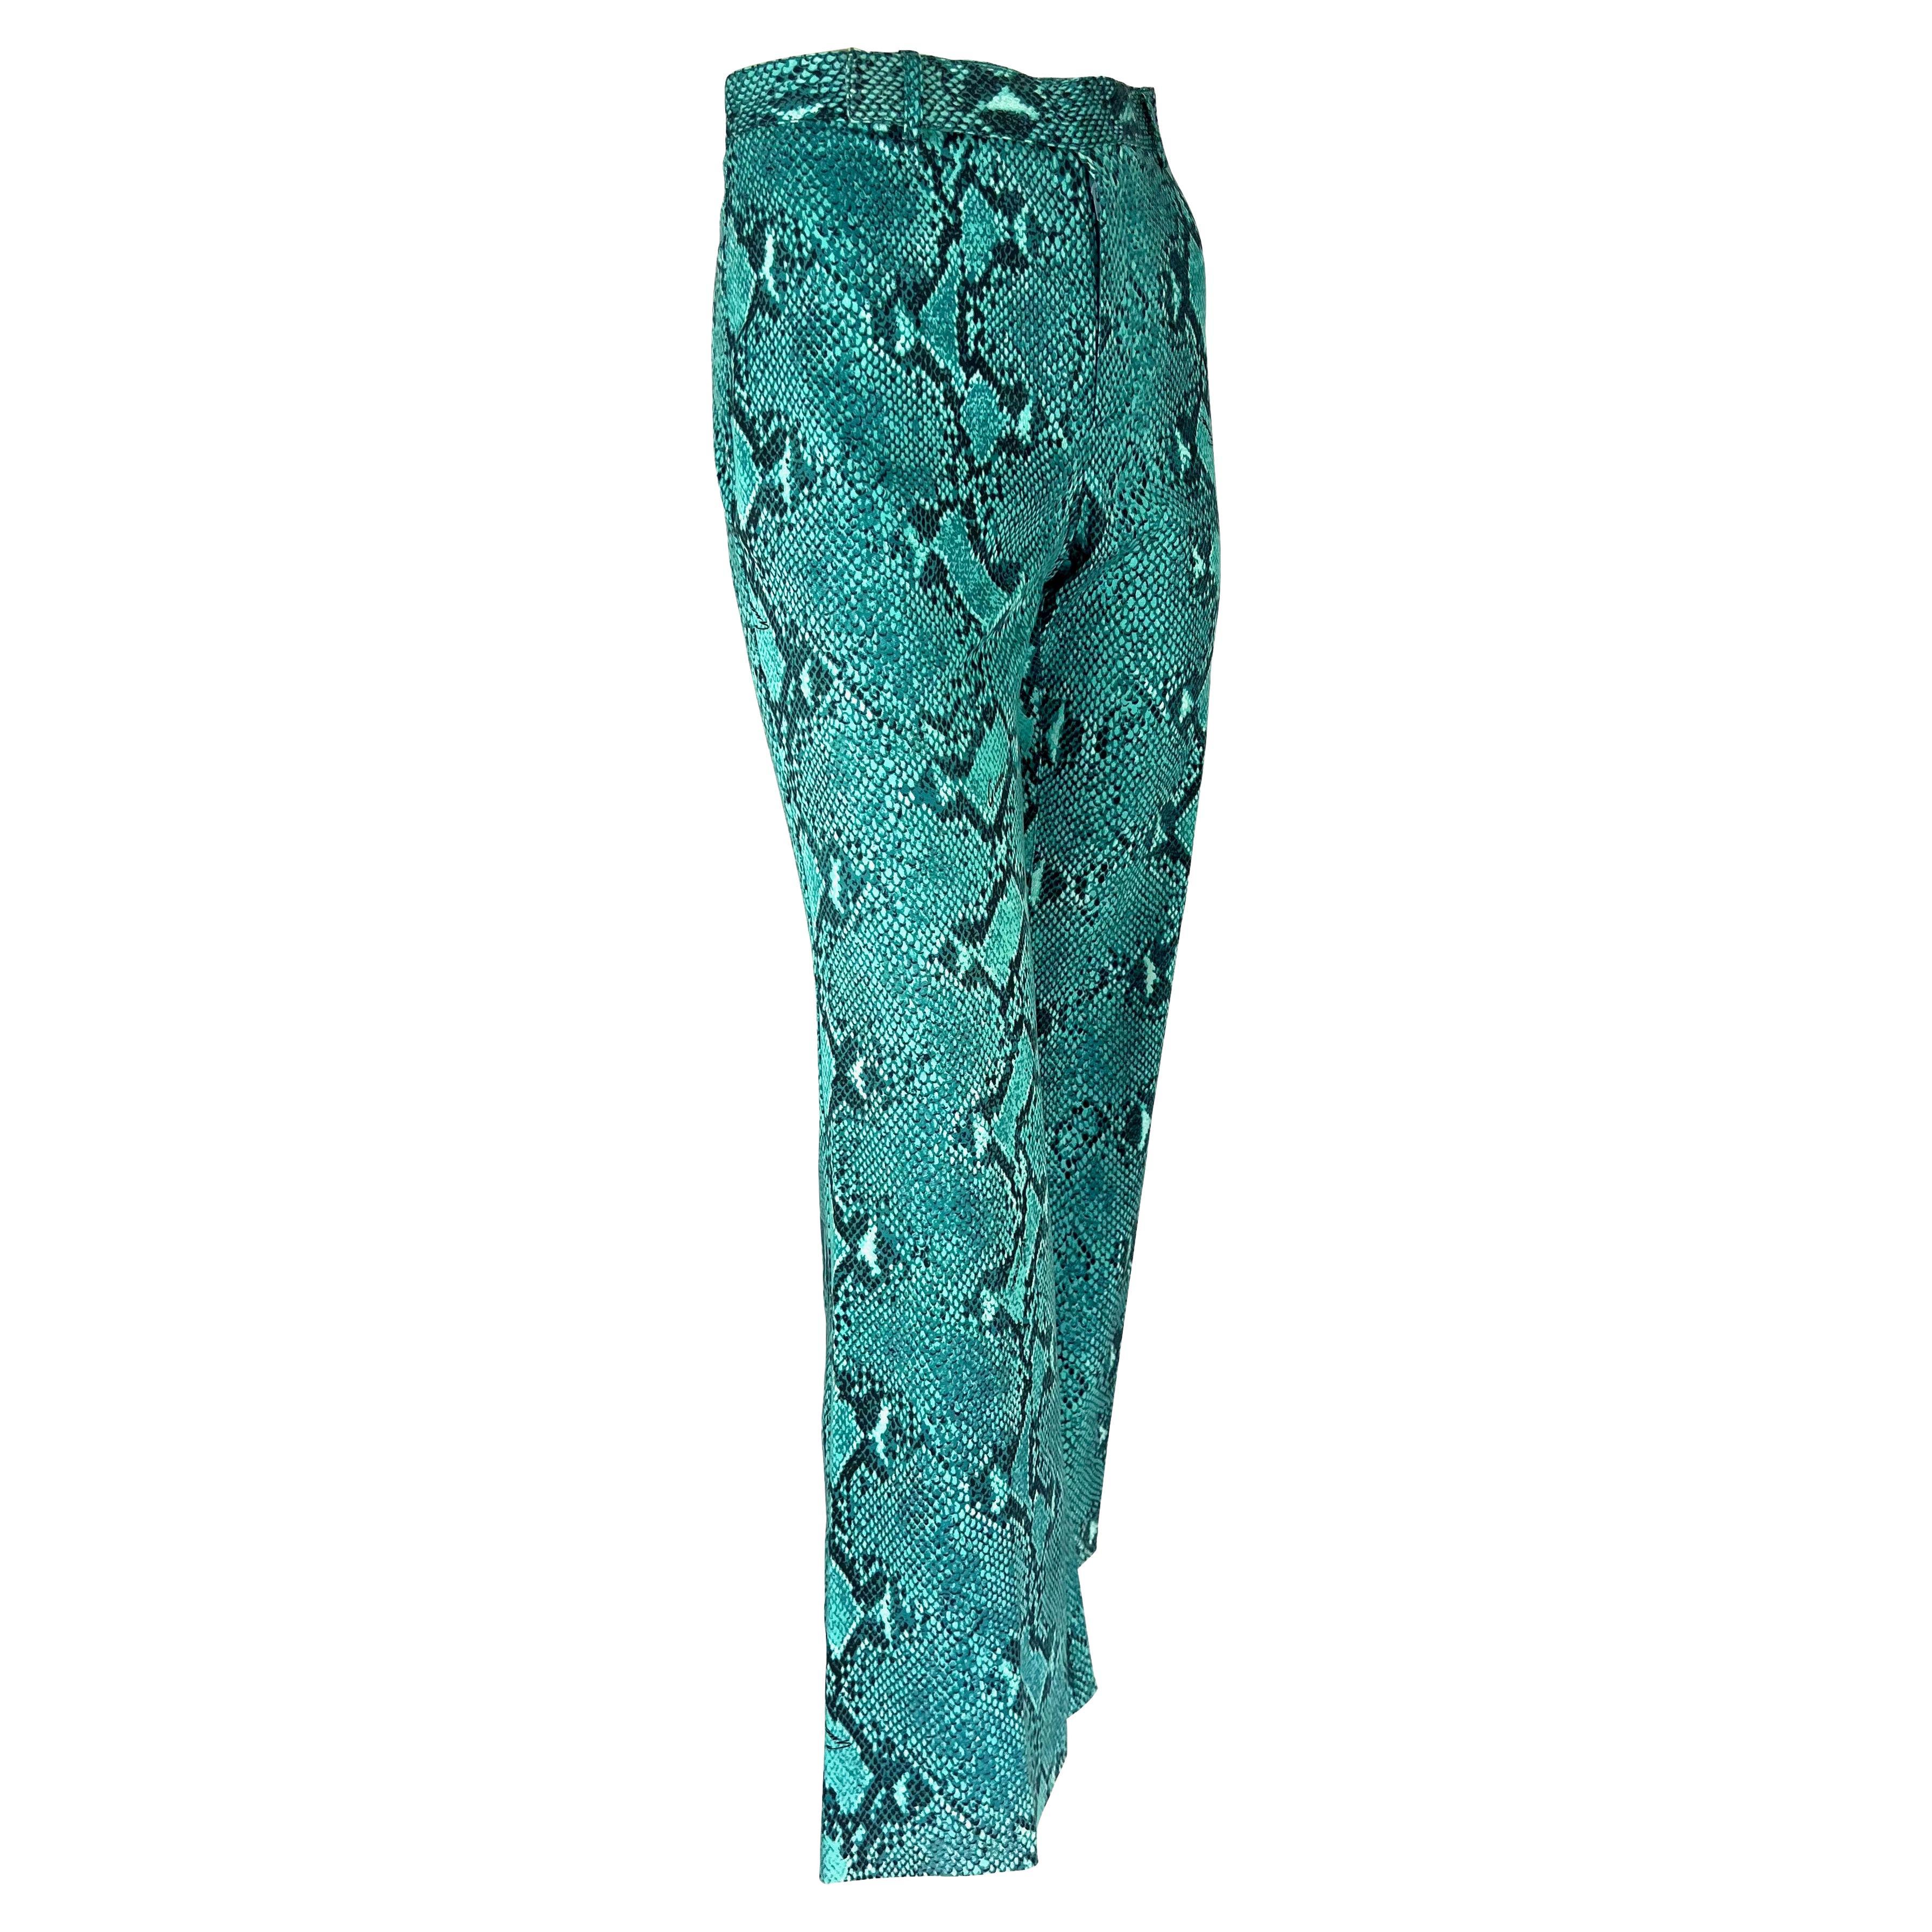 Women's S/S 2000 Gucci by Tom Ford Turquoise Snakeskin Logo Print Stretch Flare Pants